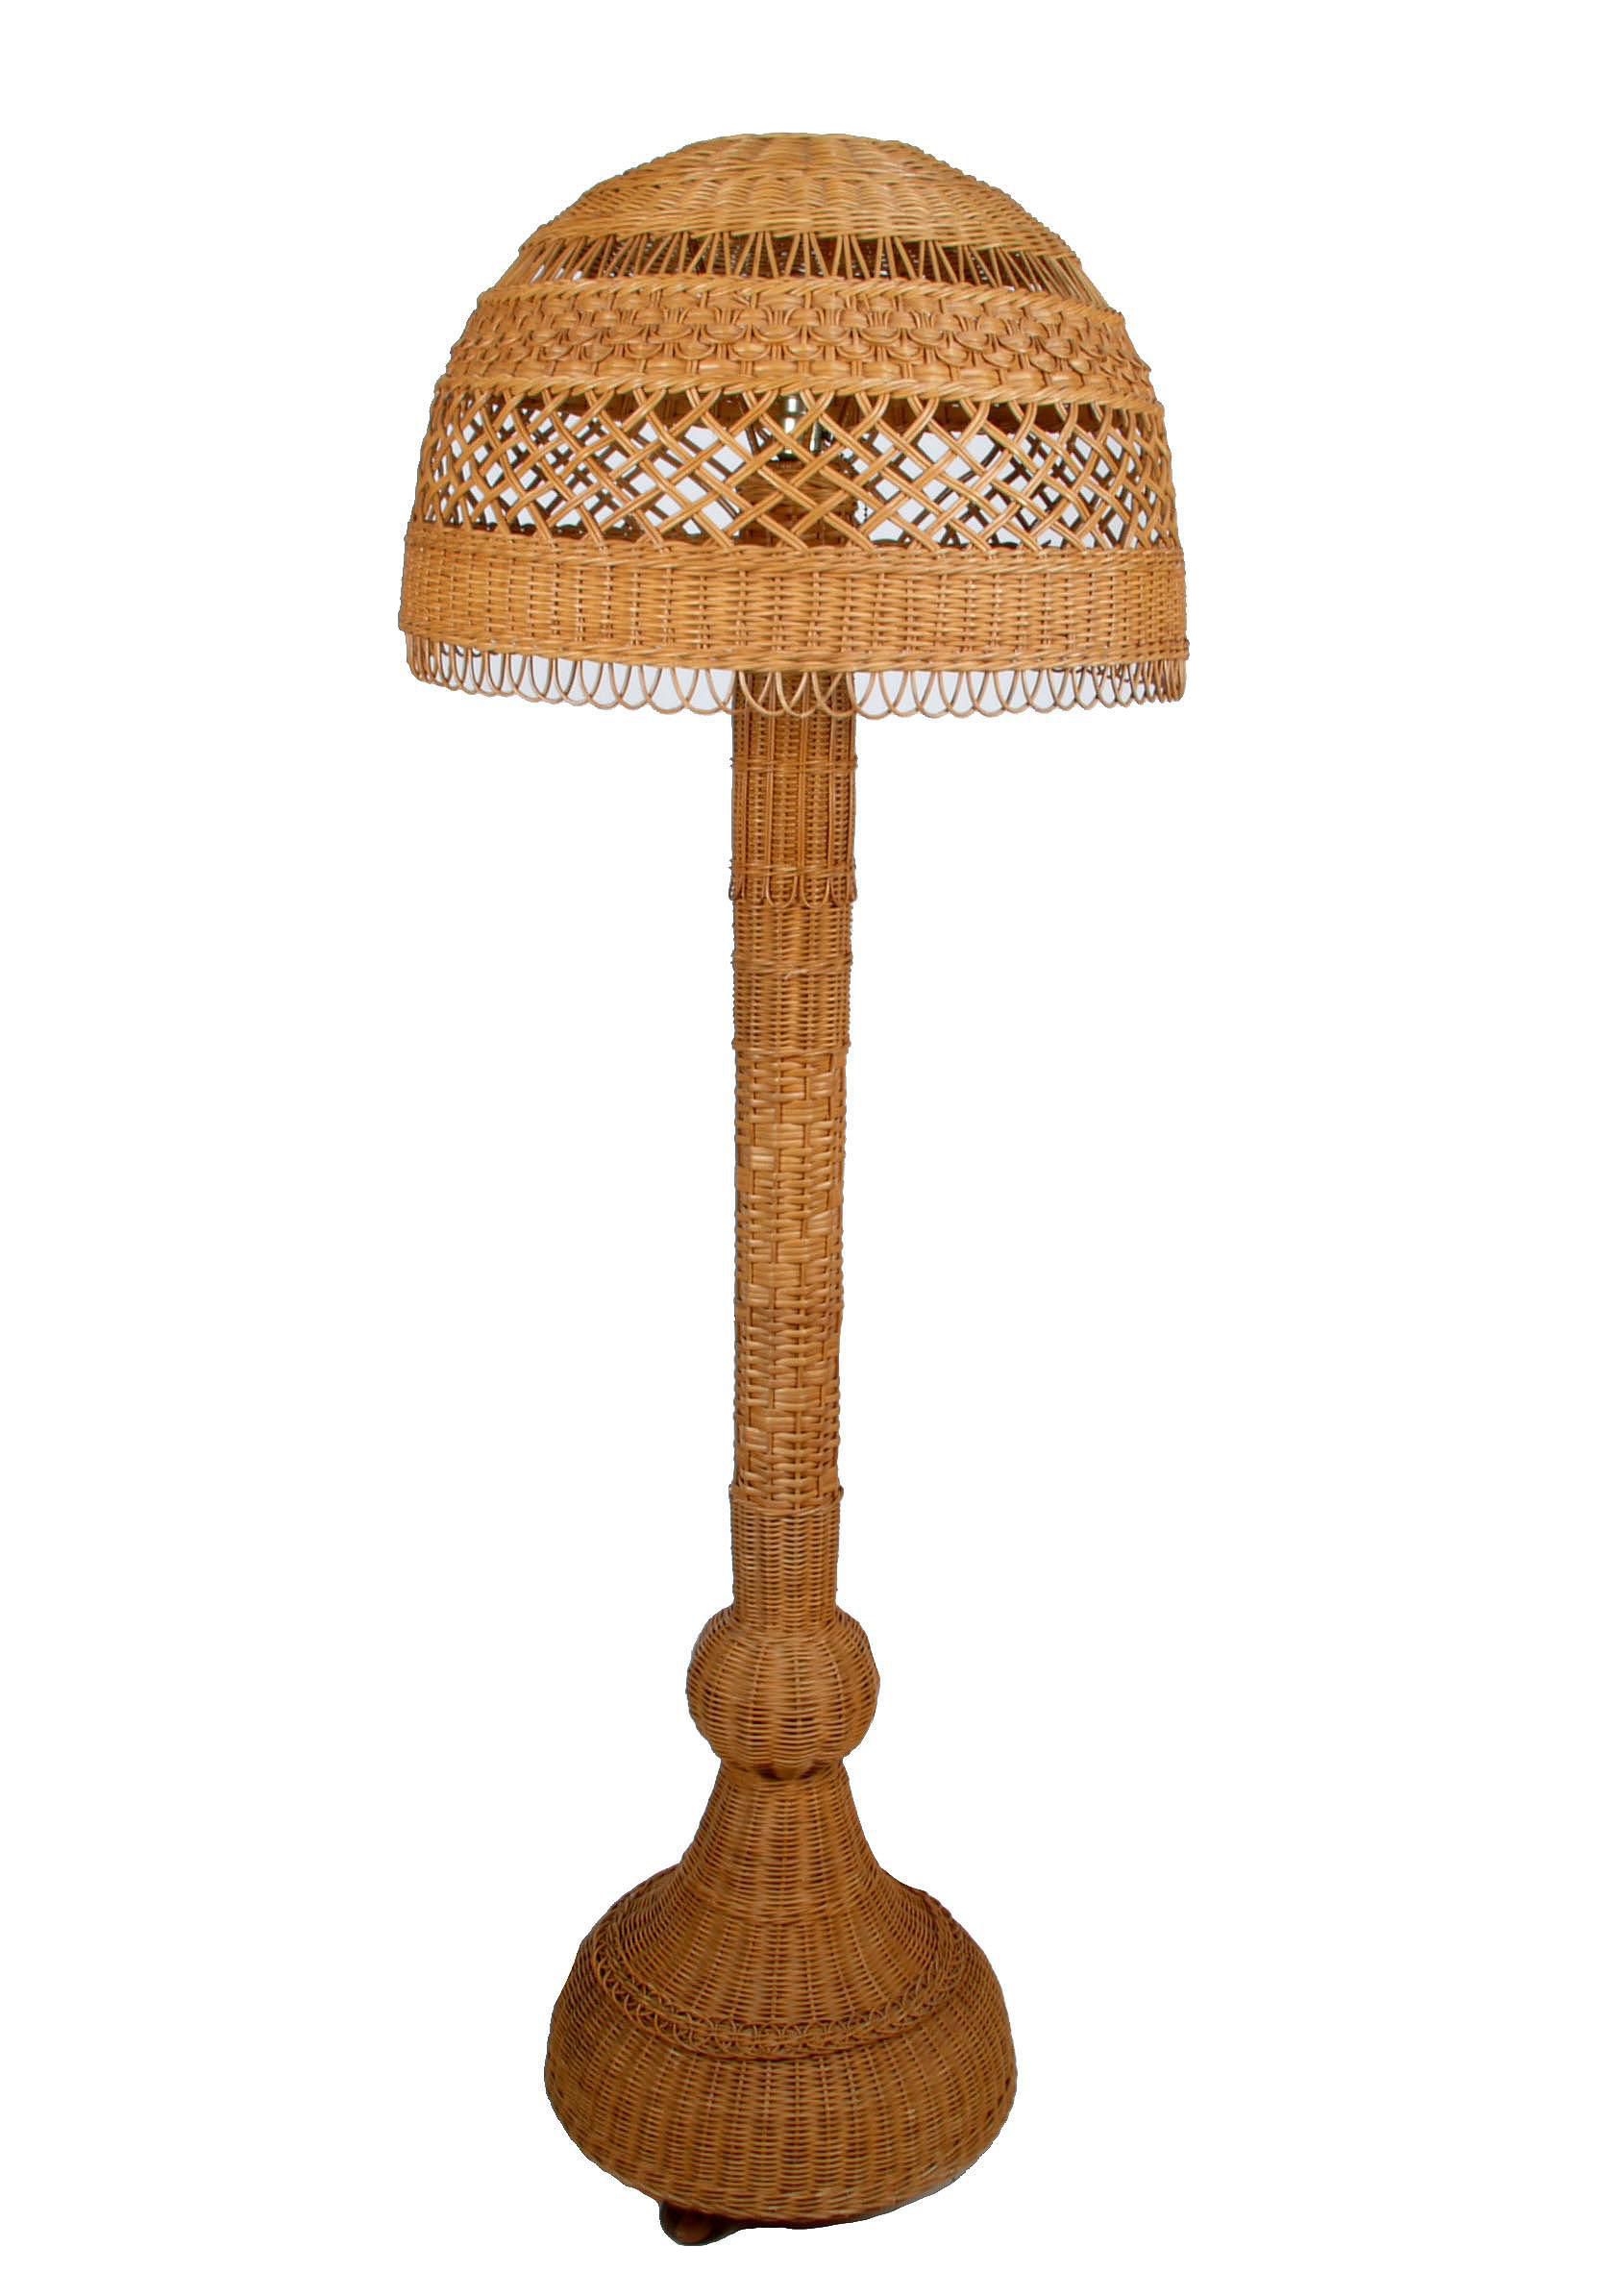 Tall Wicker Rooses Floor Lamp With Shade In 2019 Floor intended for dimensions 1669 X 2389